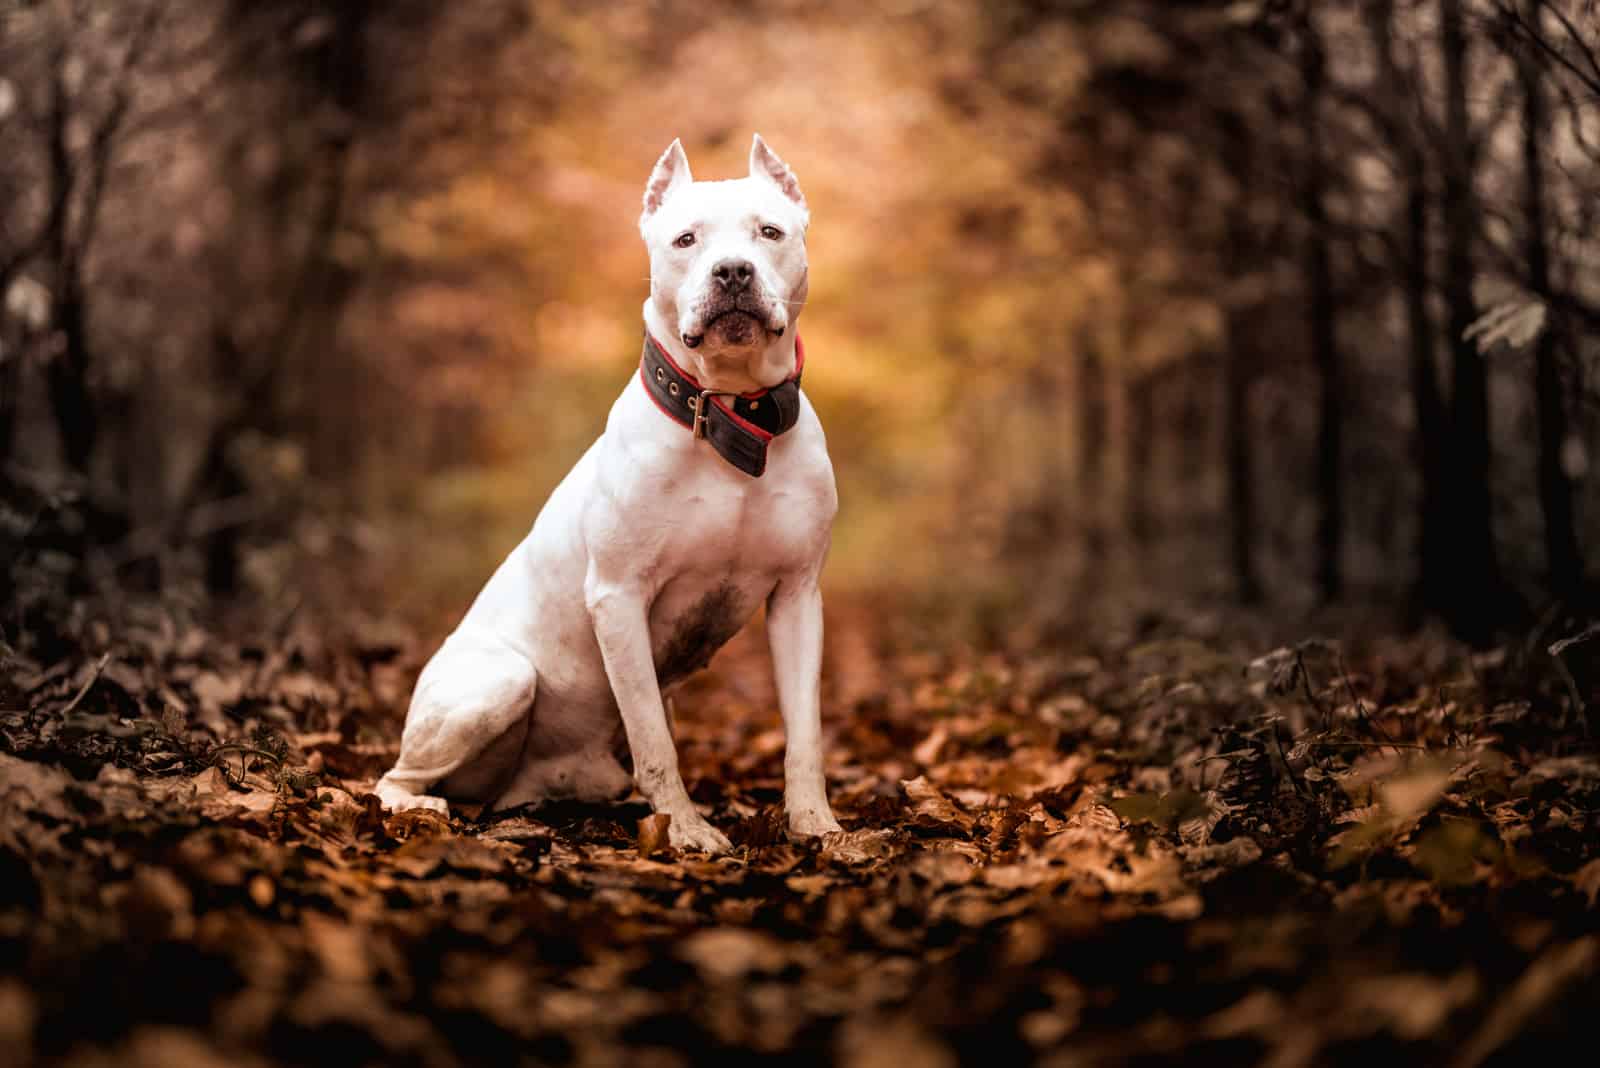 Portrait of white American pitbull terrier in outdoors in autumn forest